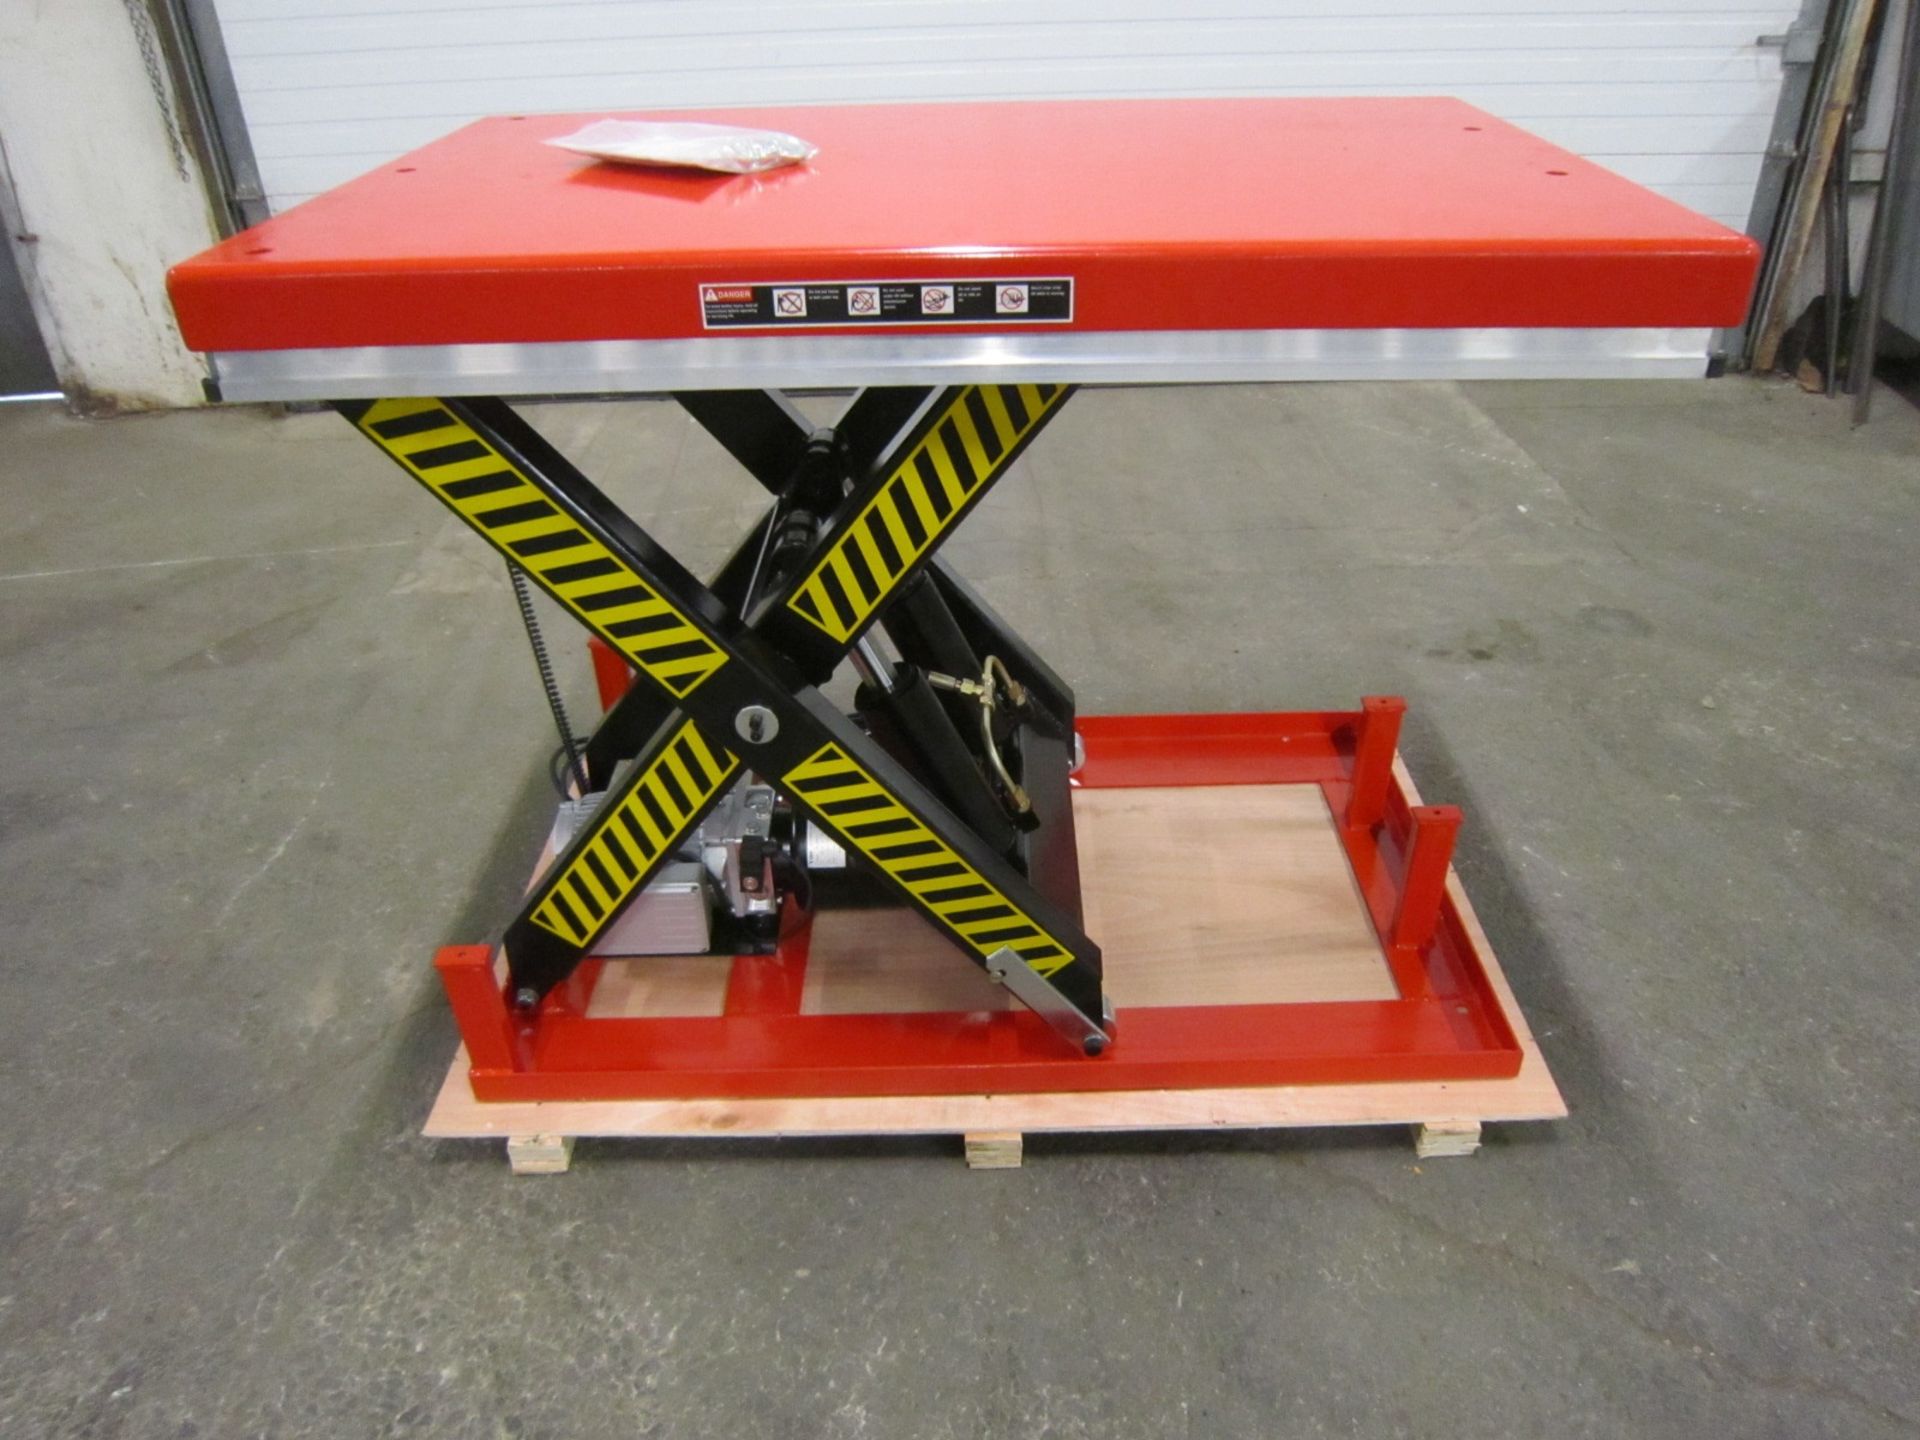 Olympic Hydraulic Lift Table 32"" x 52"" x 40"" lift - 4000lbs capacity - UNUSED and MINT - 115V